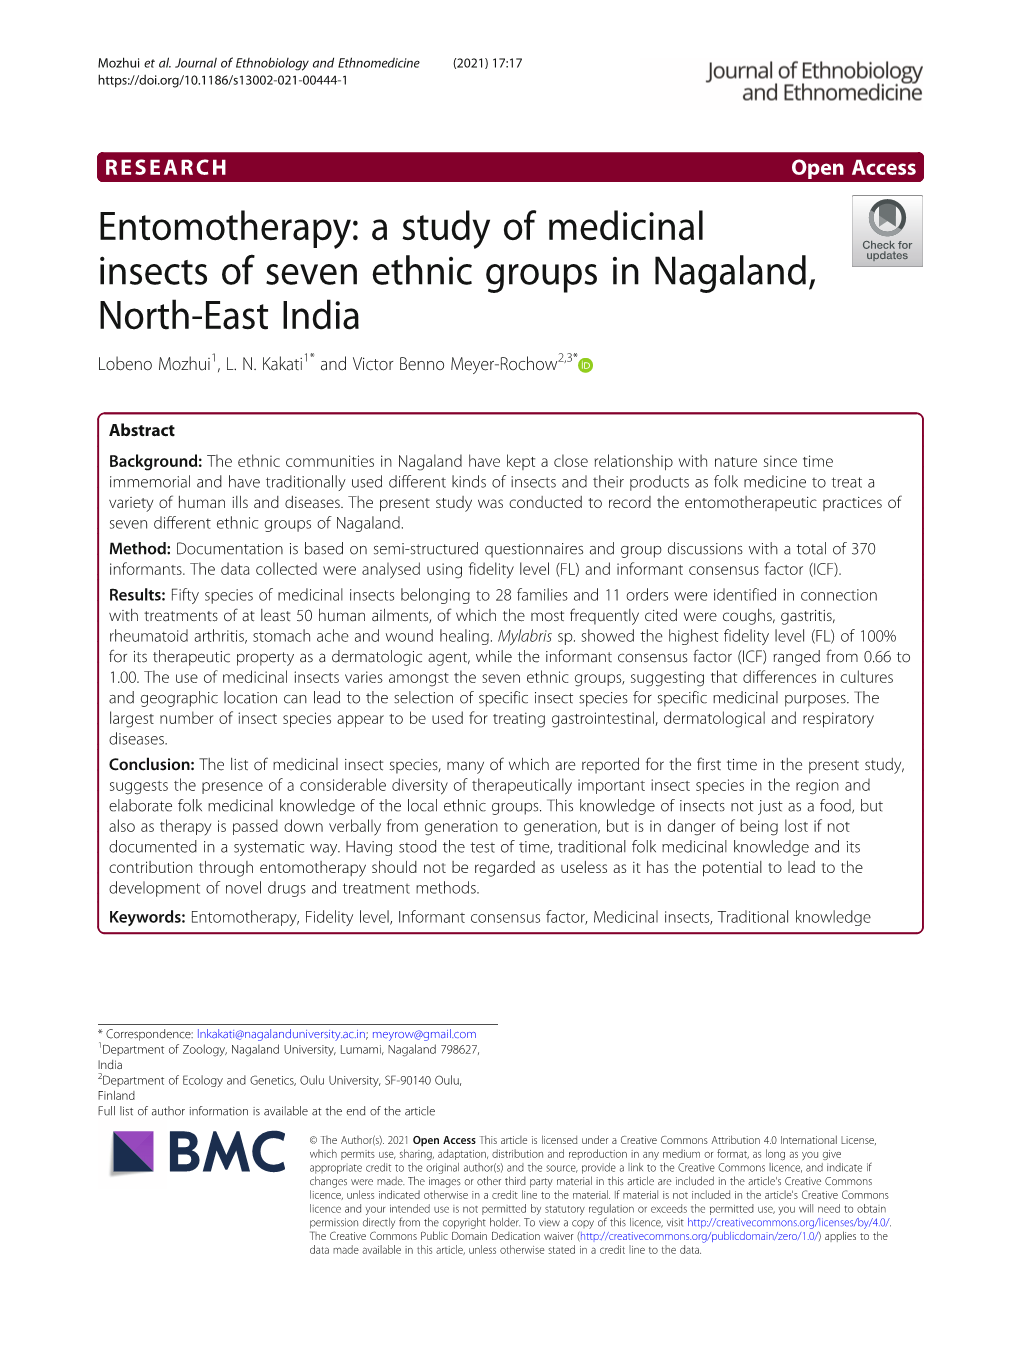 Entomotherapy: a Study of Medicinal Insects of Seven Ethnic Groups in Nagaland, North-East India Lobeno Mozhui1, L